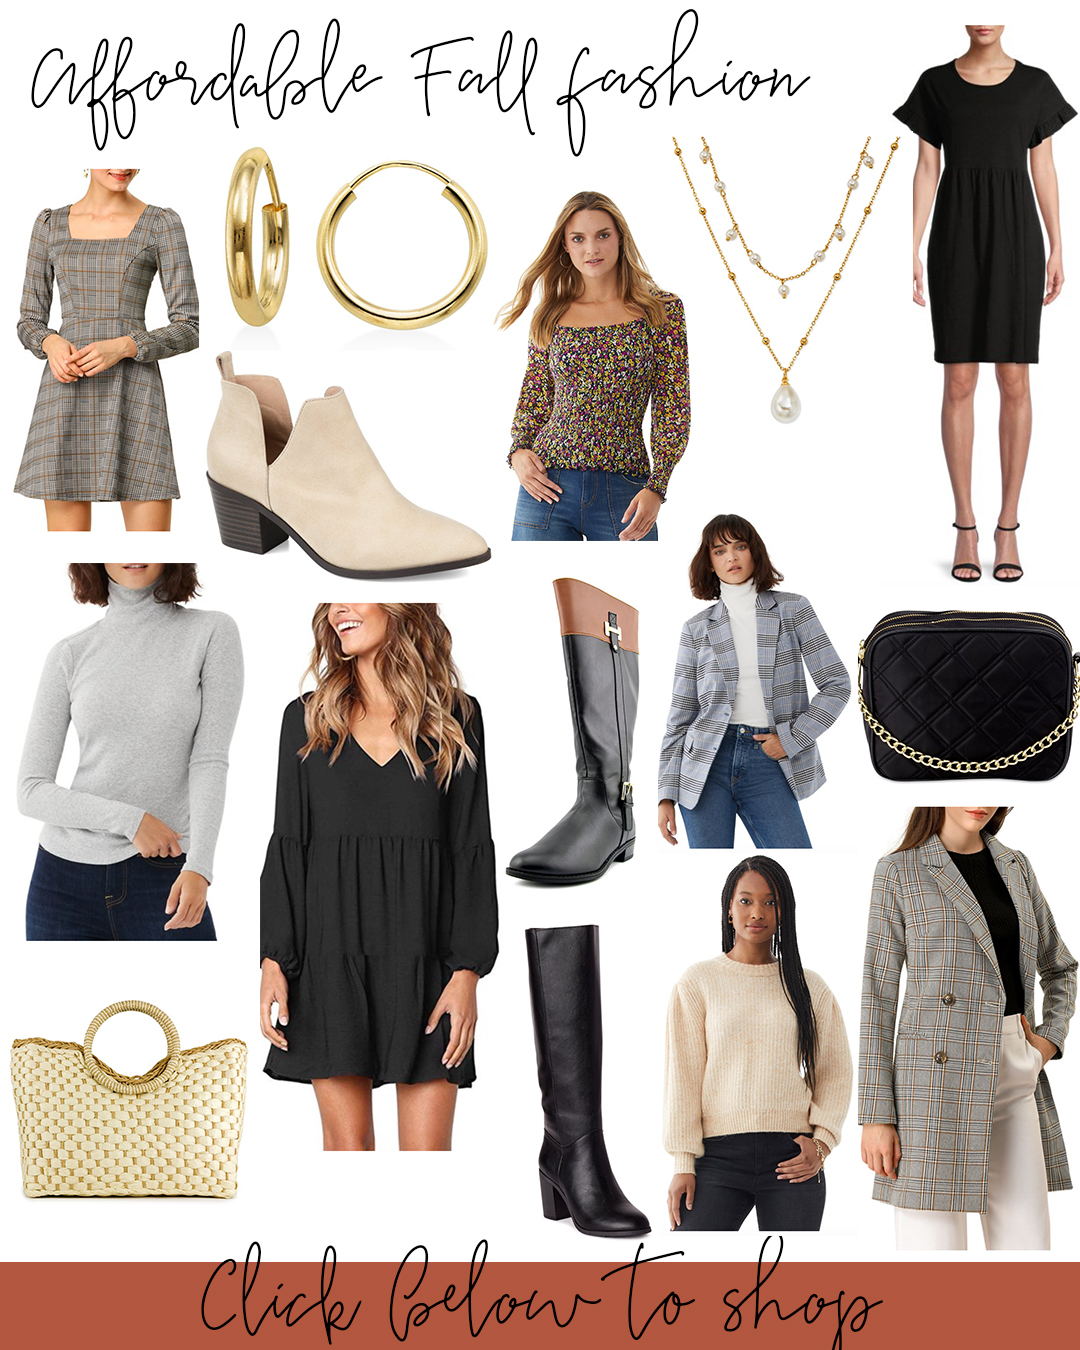 Affordable Fall Fashion 2020 - Little Black Dress Options. Dresses for under $15 and options for every budget. Accessories, booties, boots and more! 